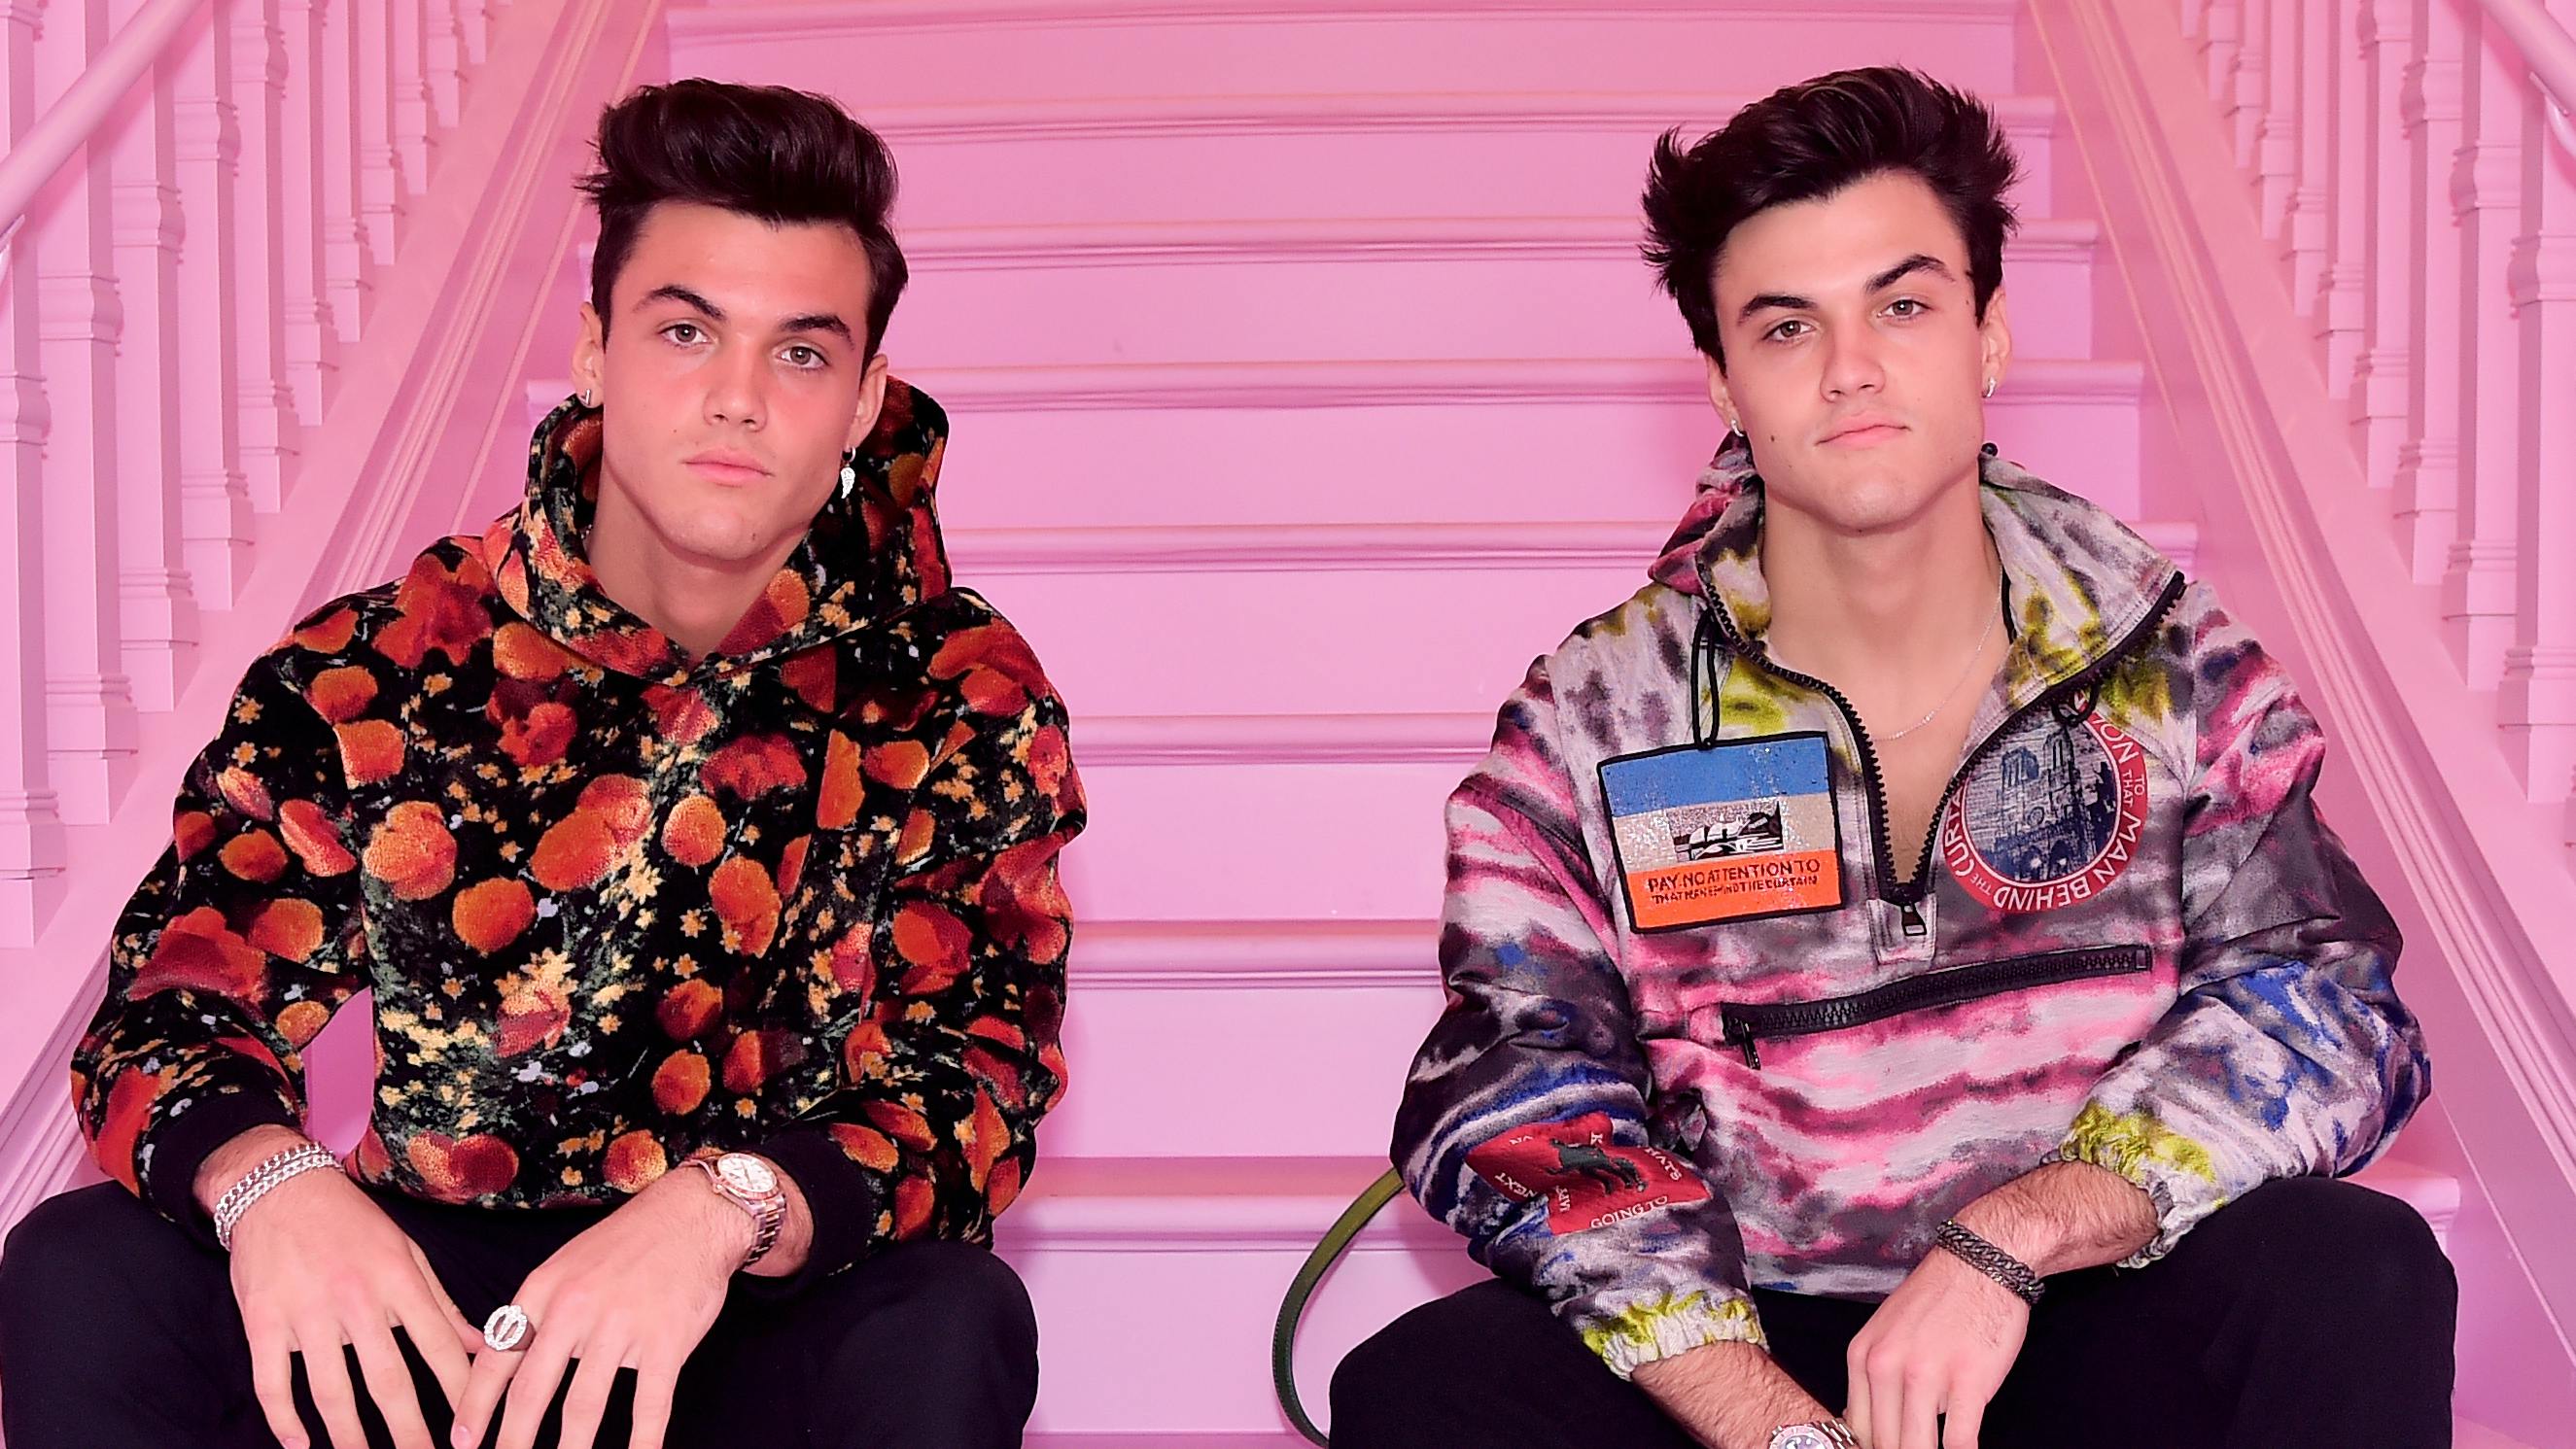 The Dolan Twins Get Tattoos From Fans  TigerBeat